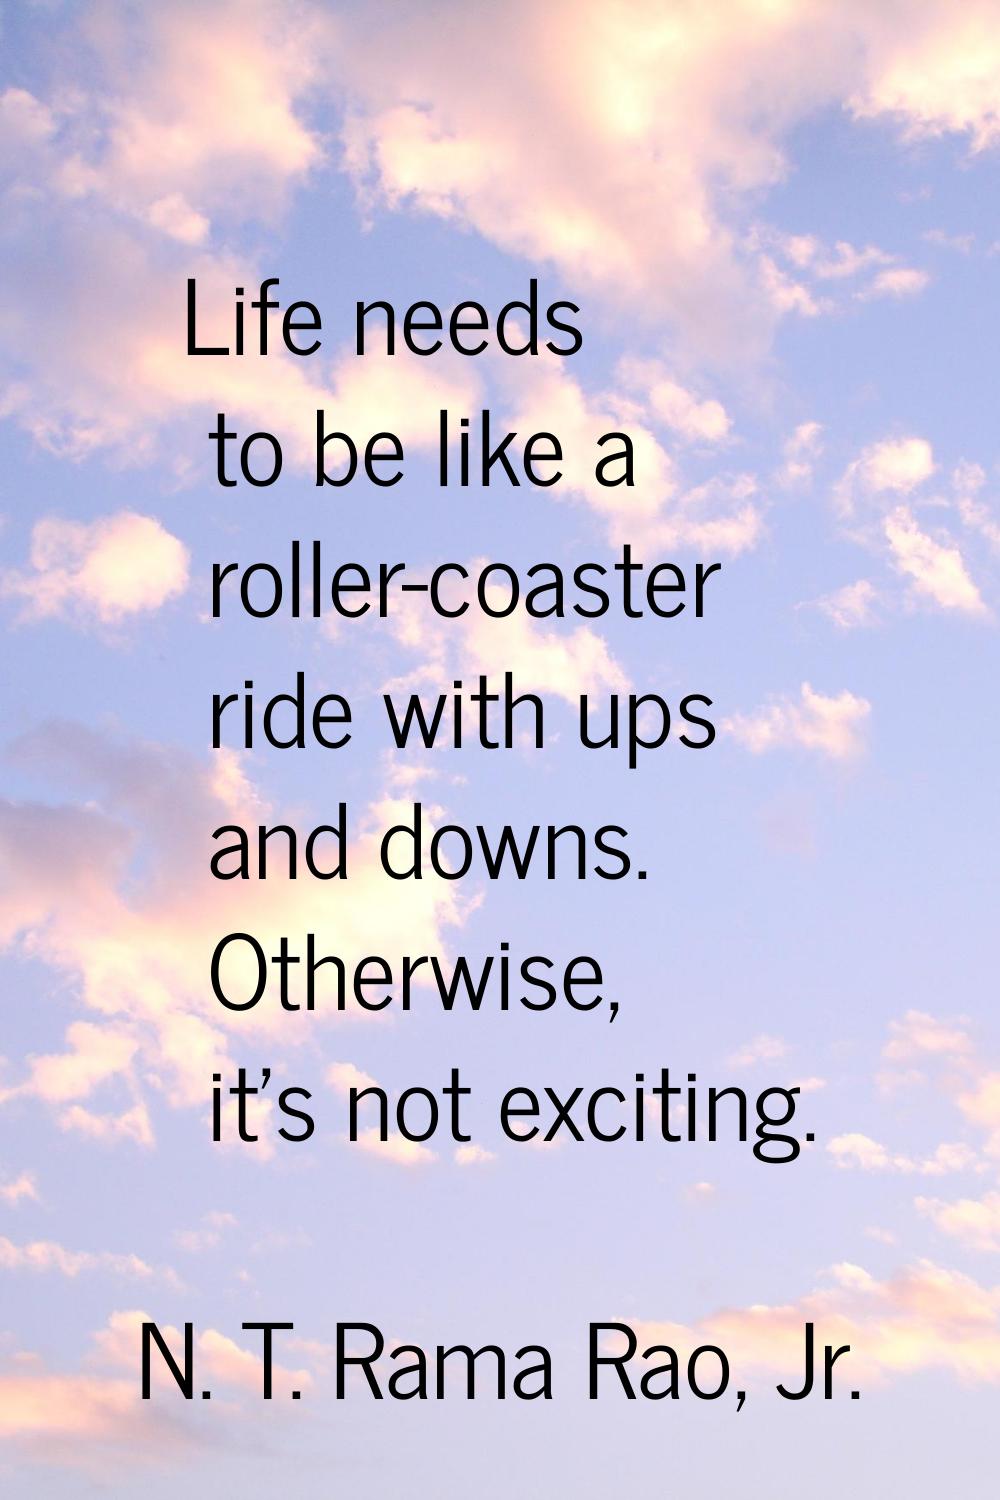 Life needs to be like a roller-coaster ride with ups and downs. Otherwise, it's not exciting.